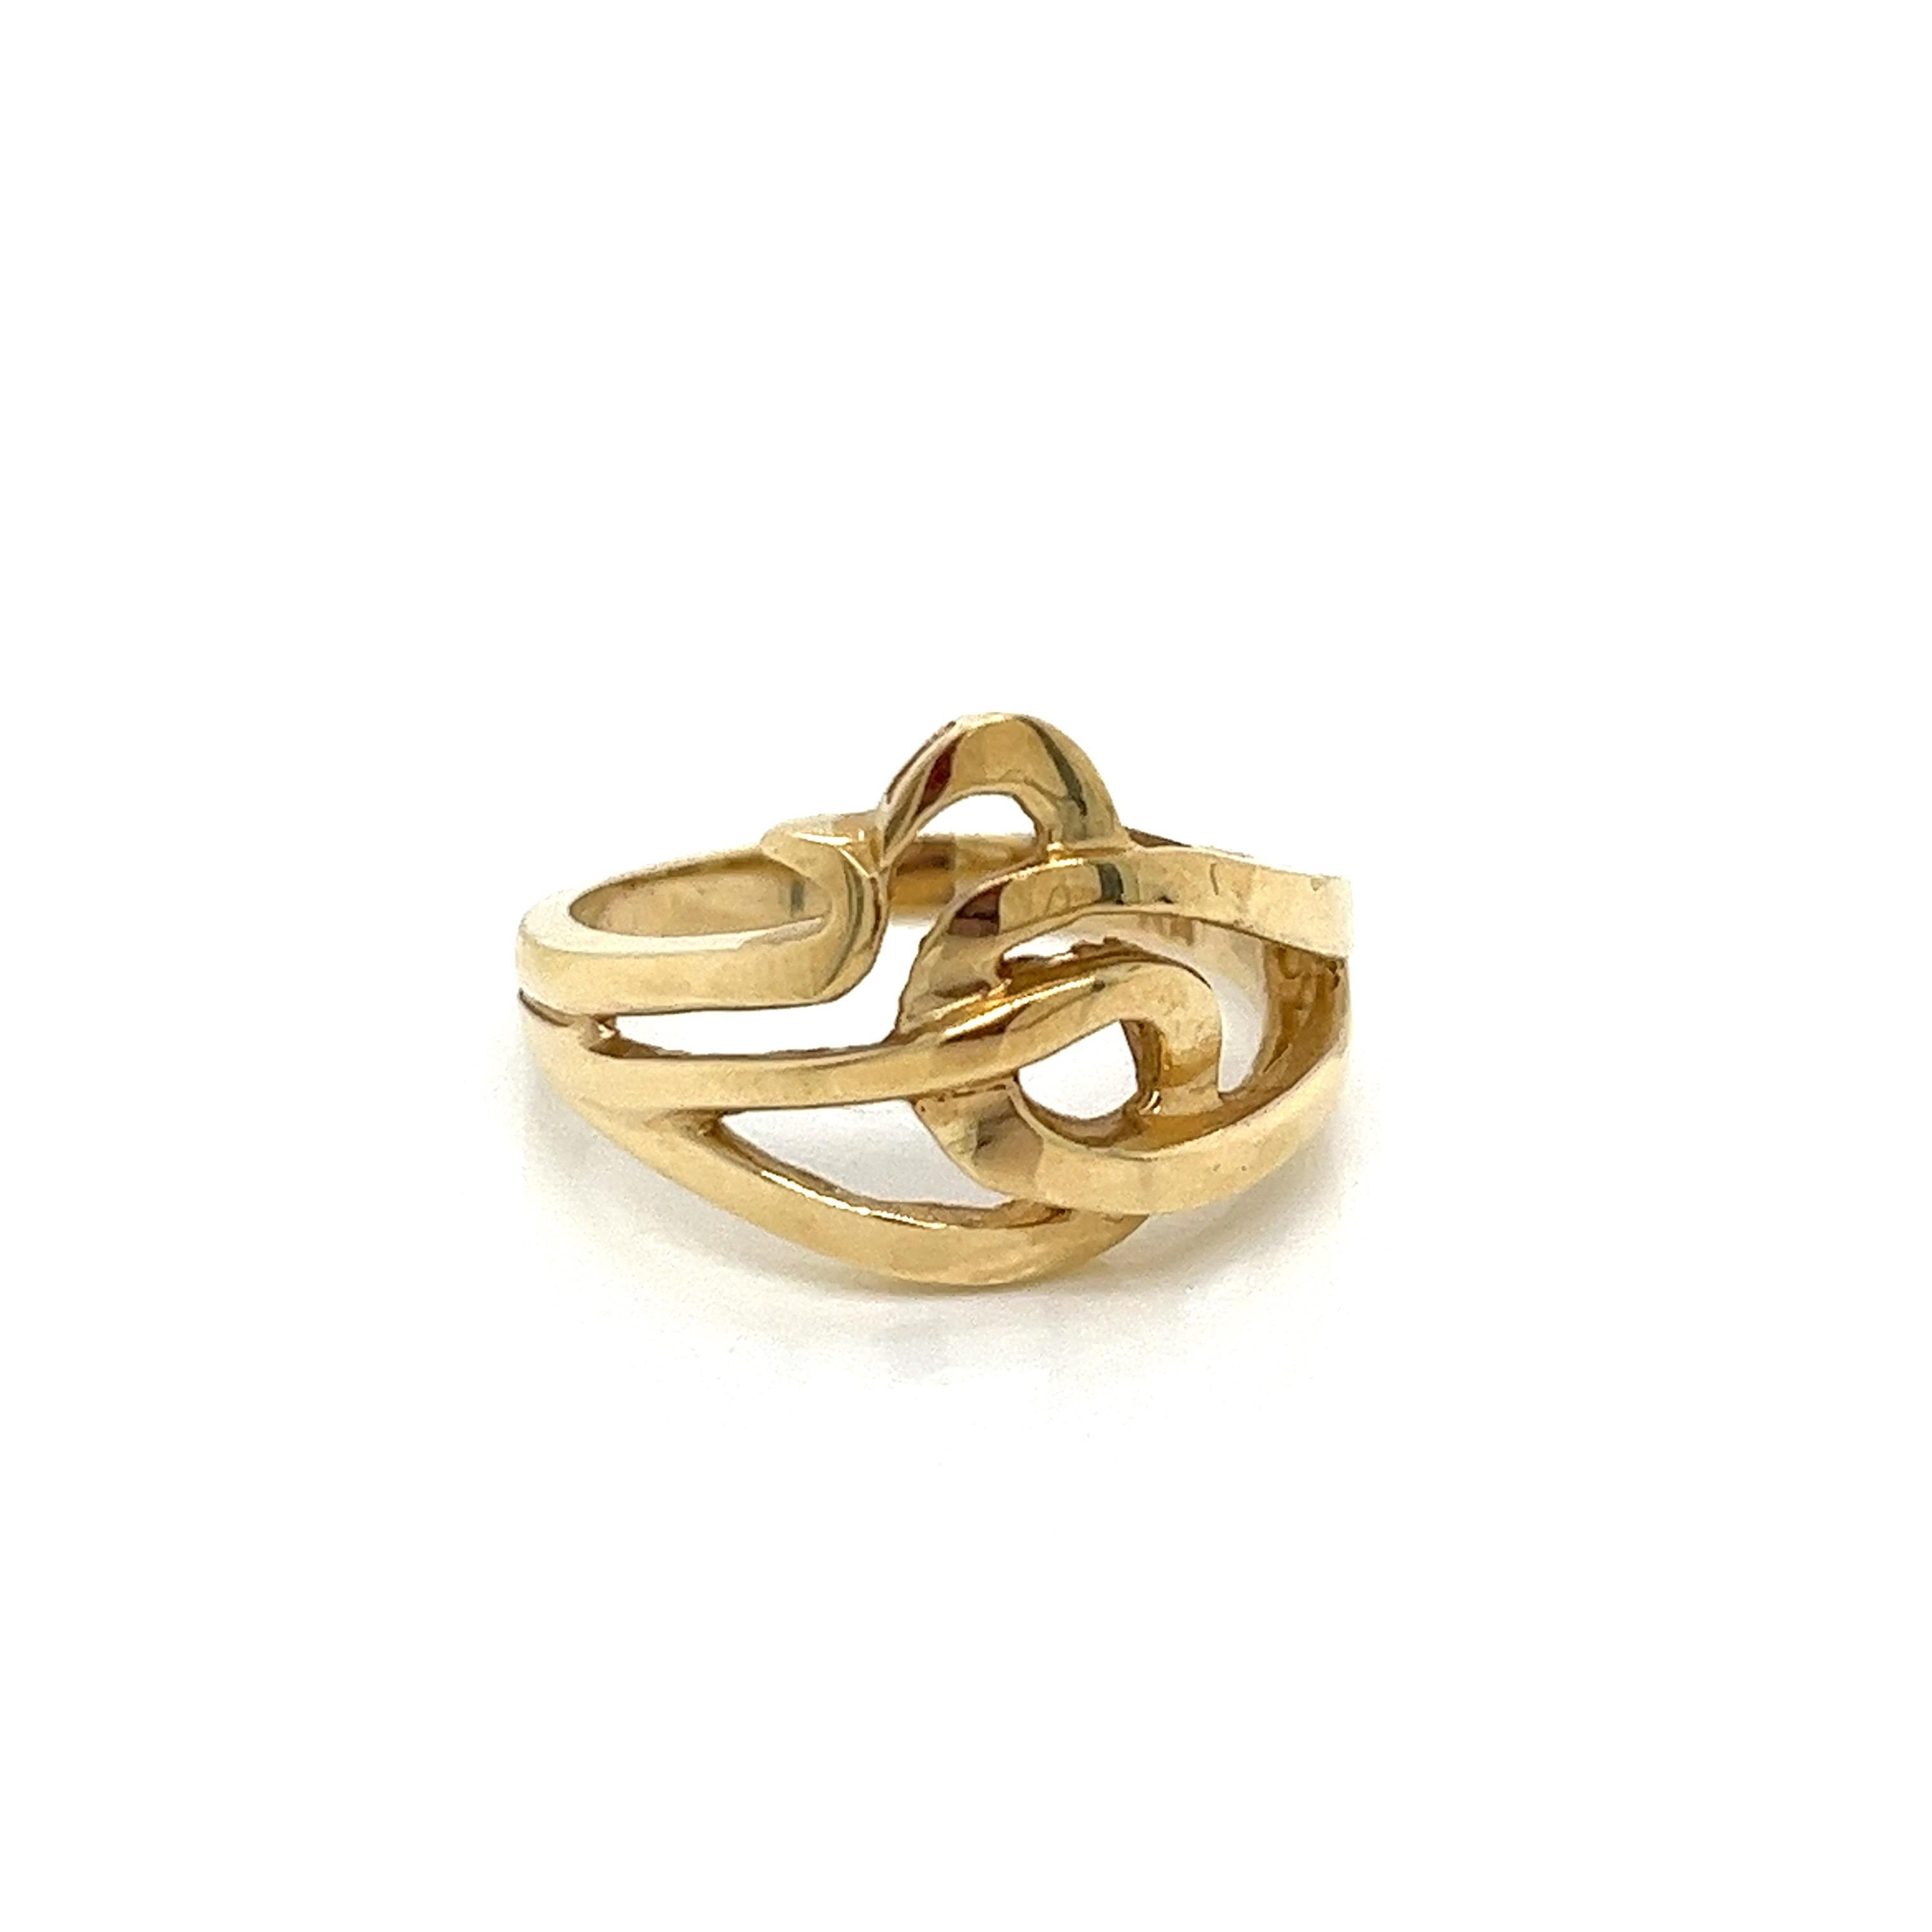 Vintage 1980's 14k Yellow Gold Statement Ring. The width of the ring on top is 13mm wide and tapers to 5mm on the side and 2.3mm on the bottom. The finger size is 6.25 and it can be sized upon request. The ring weighs 4.03g.